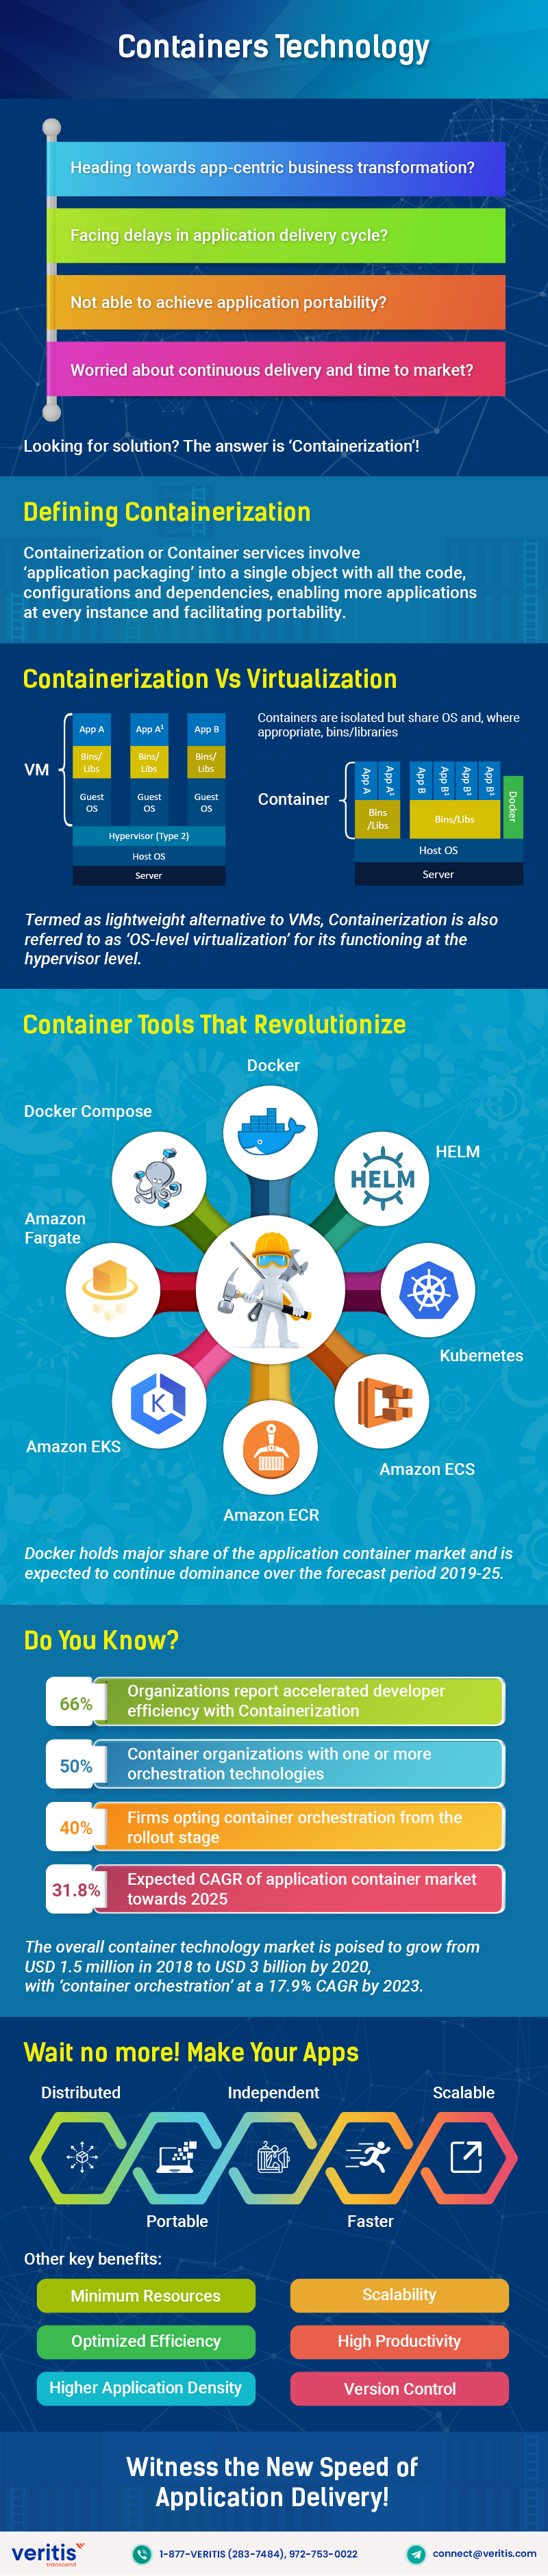 Meet New App Speeds with Container Technology Services IT Infographic